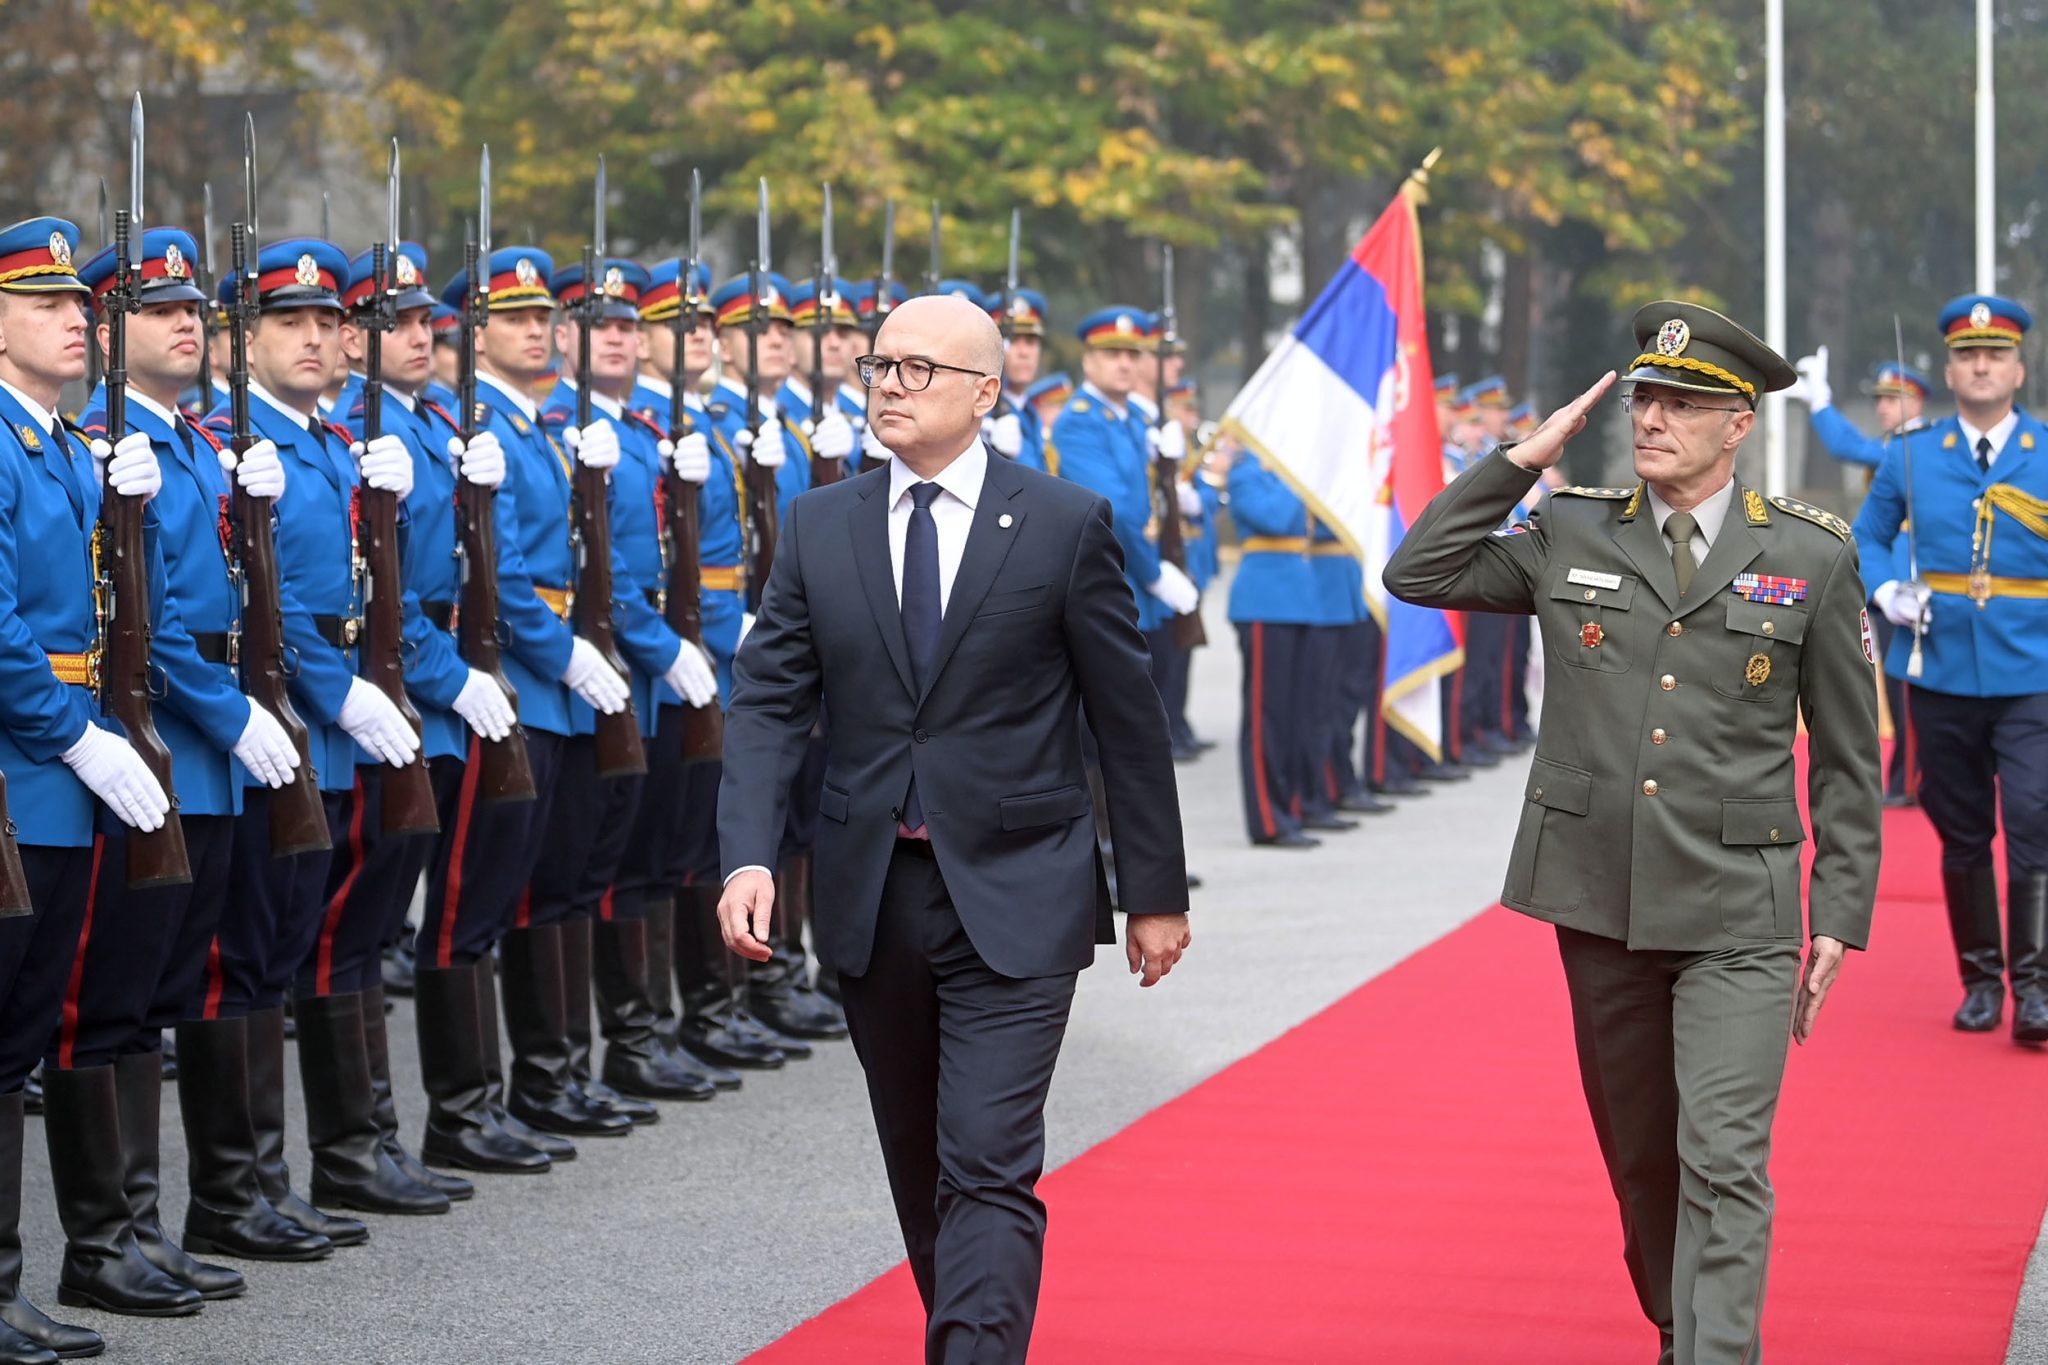 Serbian Armed Forces Move To Reinstate Compulsory Military Service